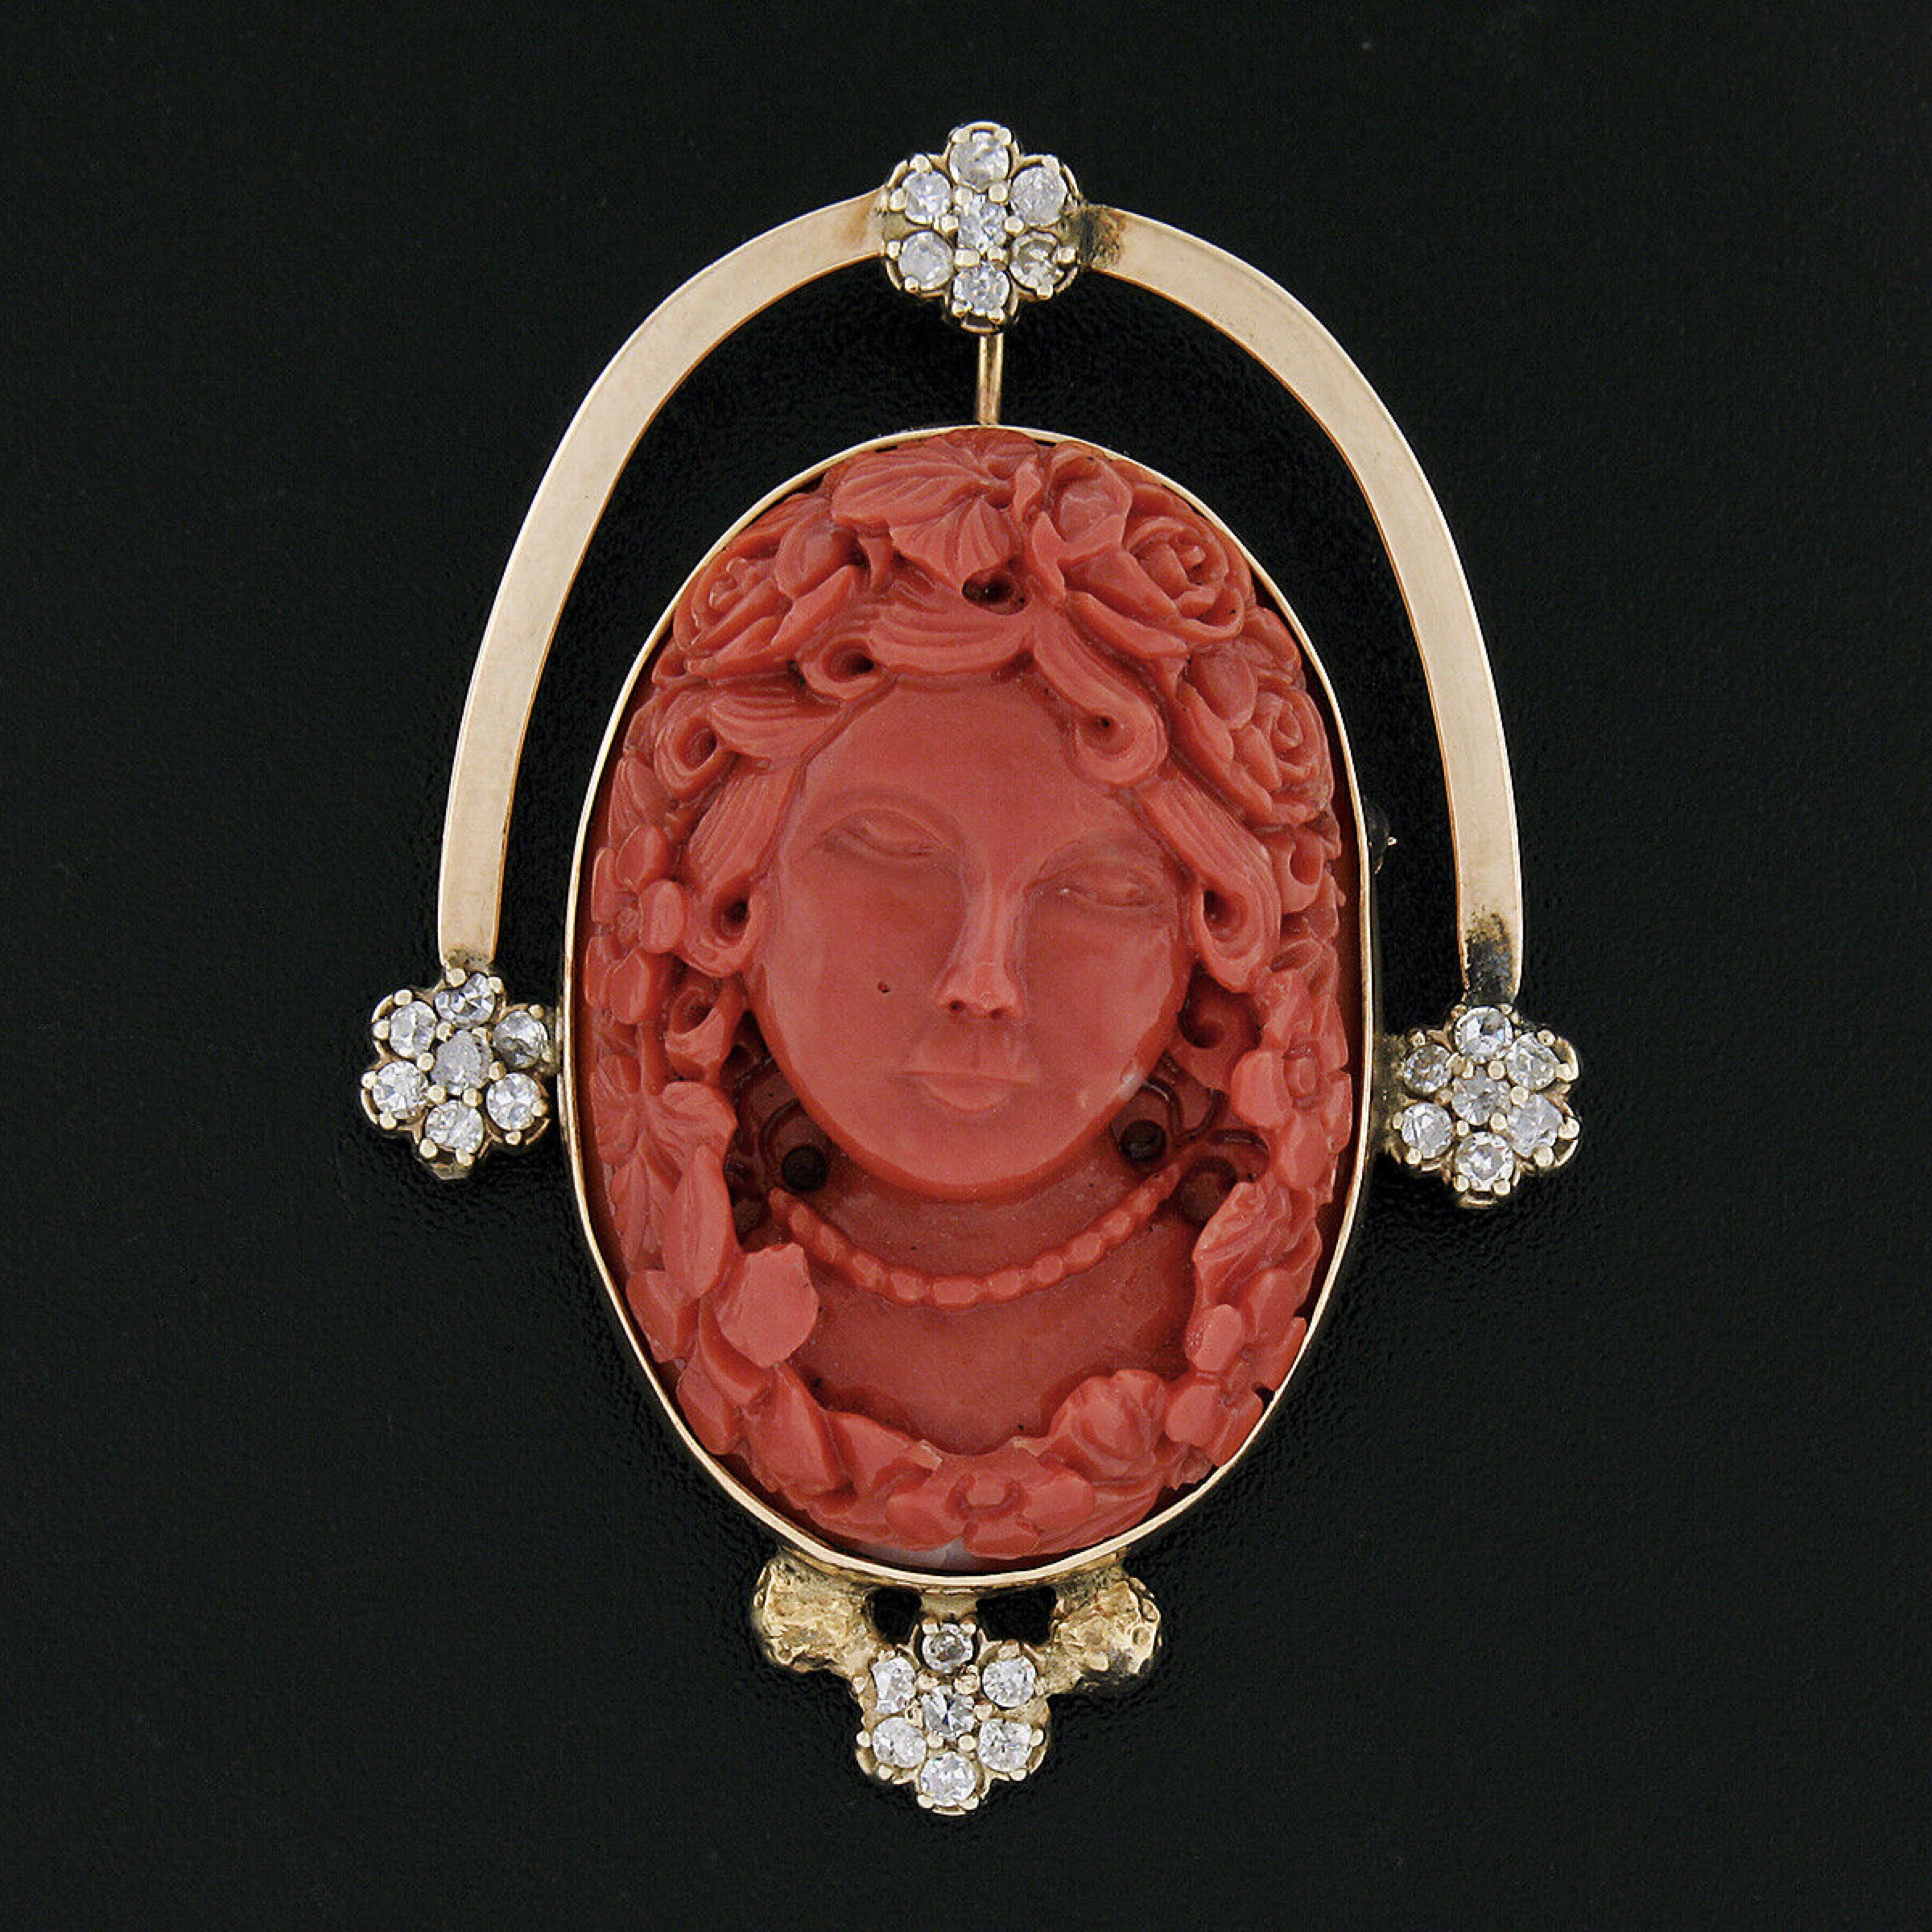 Here we have a magnificent vintage pin/brooch or pendant that was crafted from solid 14k yellow gold featuring a large, GIA certified, natural coral neatly bezel set at the center in which has been masterfully carved showing an incredibly detailed